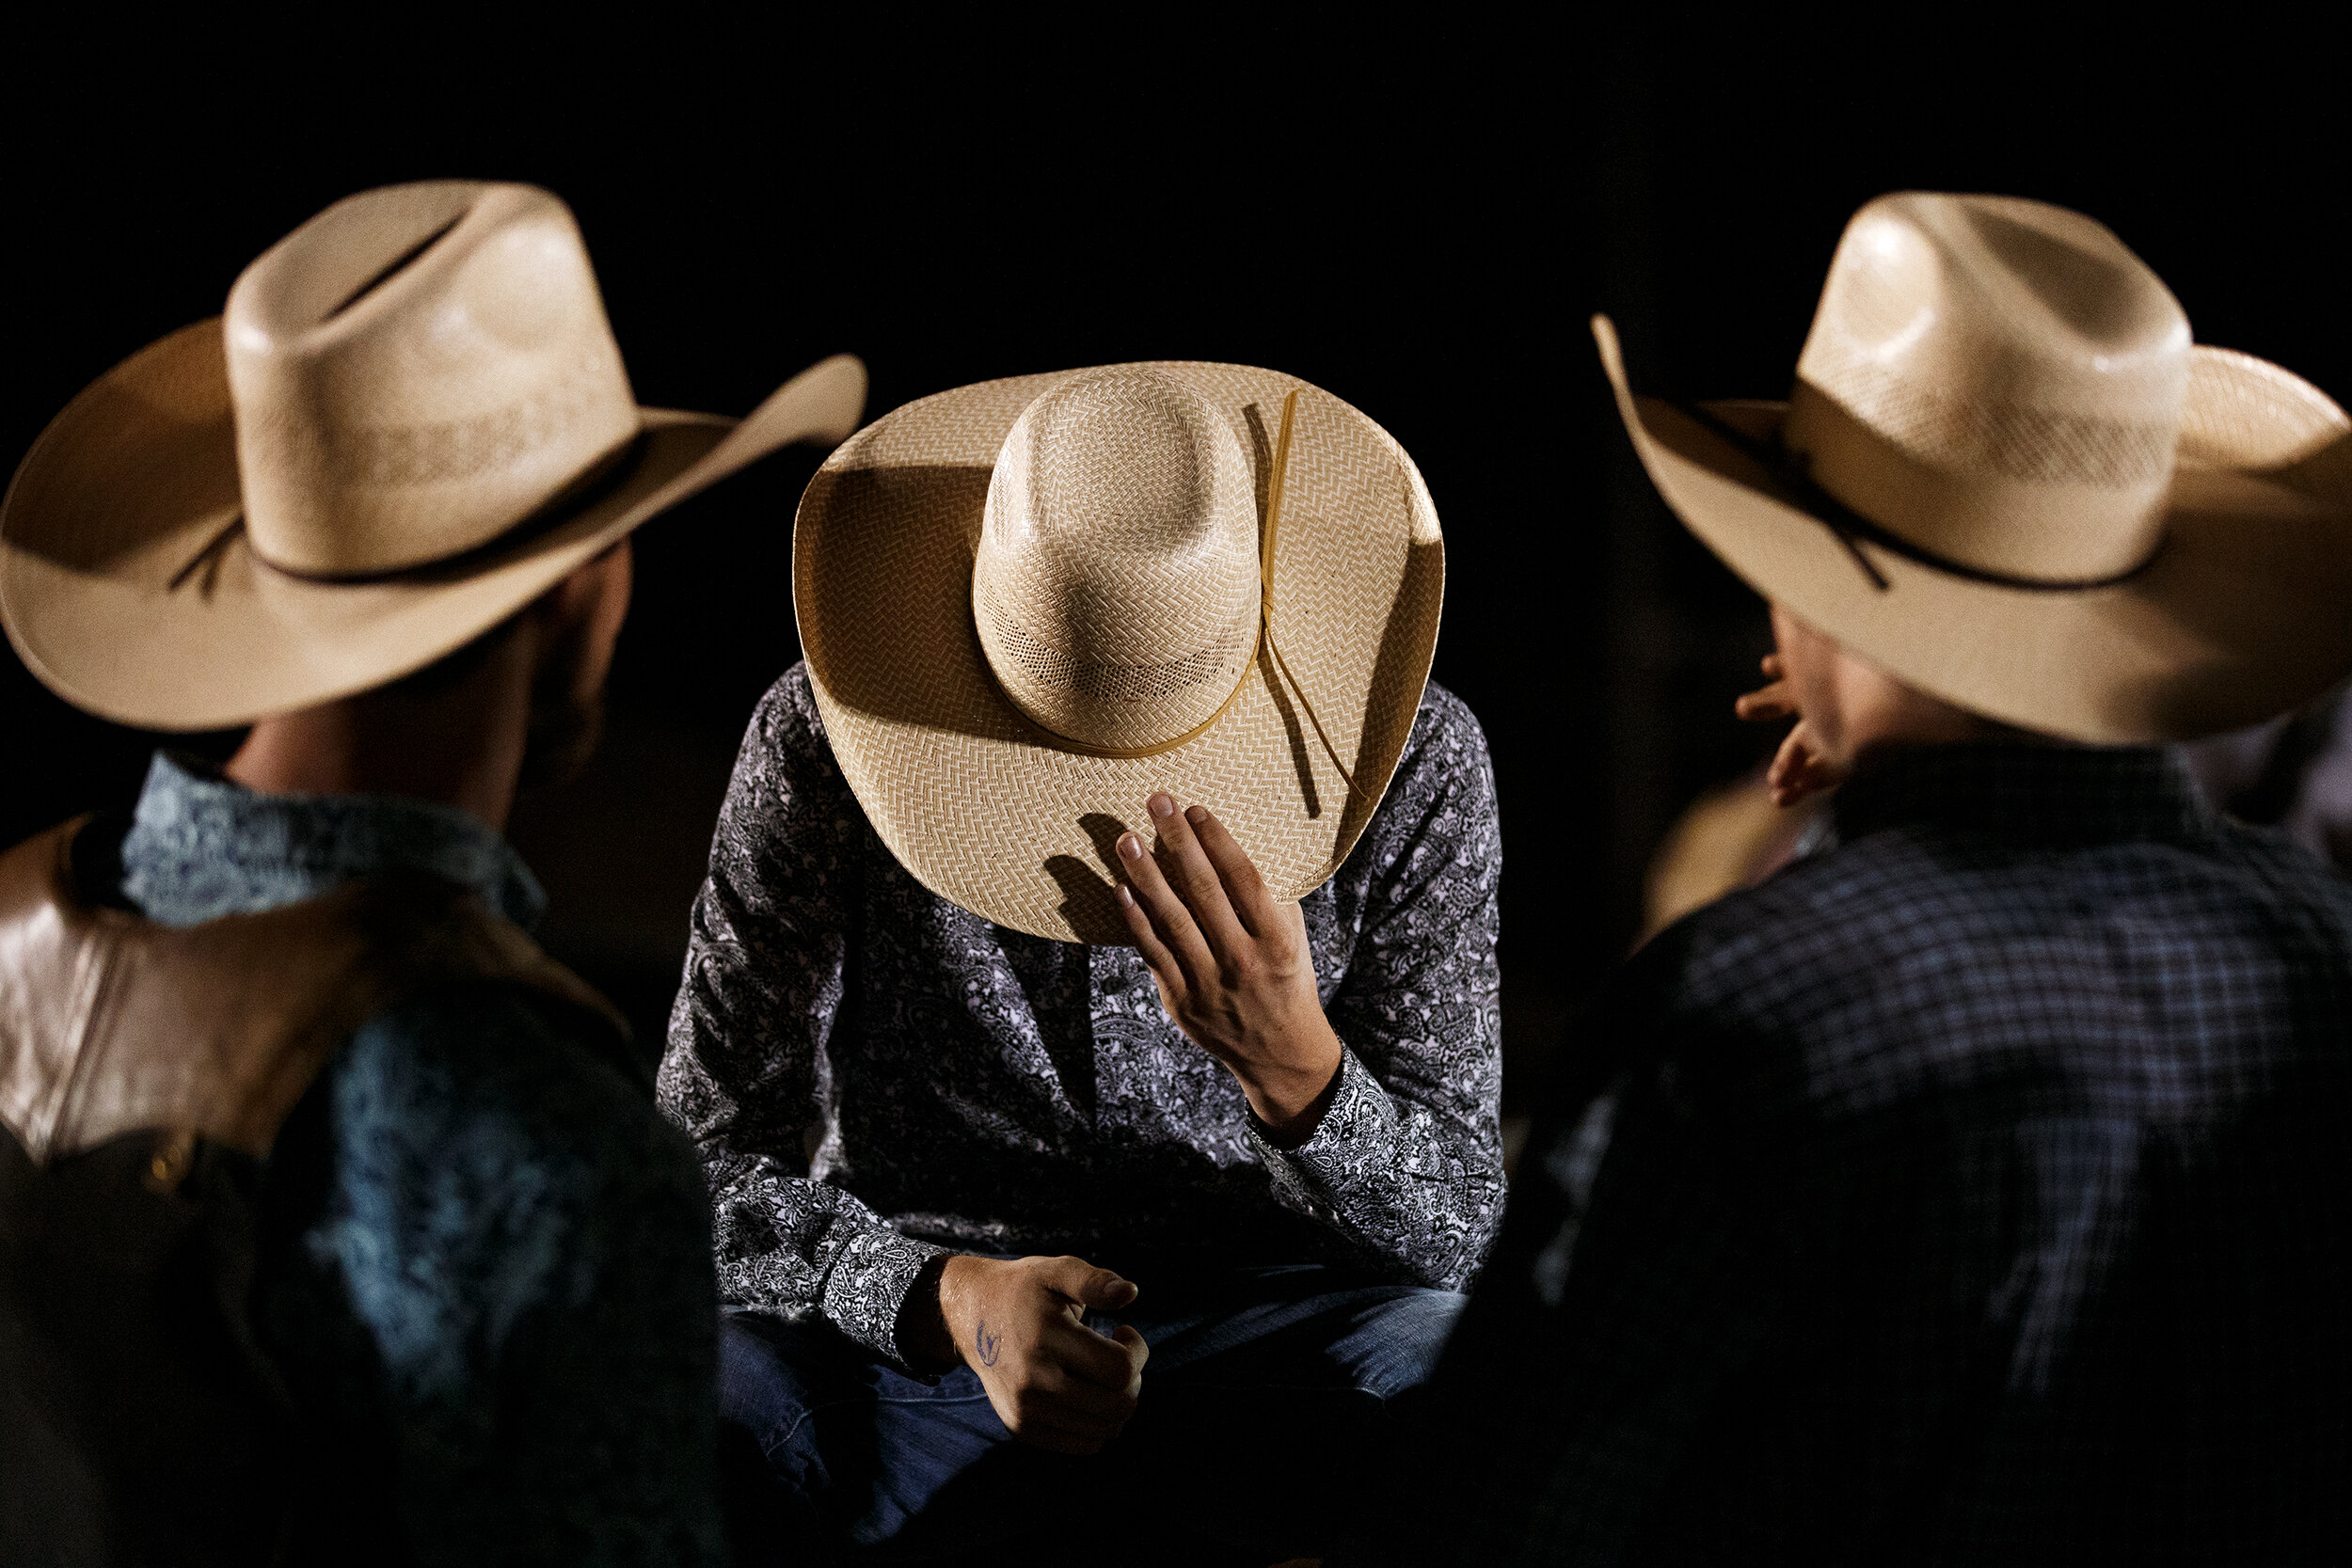  (Left to Right) Scott Rogers, Alex Woolums, and Jesse Wright gather together before the bull riding competition at the Fox Hollow Rodeo in Waynesville, Ohio, on Saturday, September 28th, 2019. There was tension in the air as this was the final compe